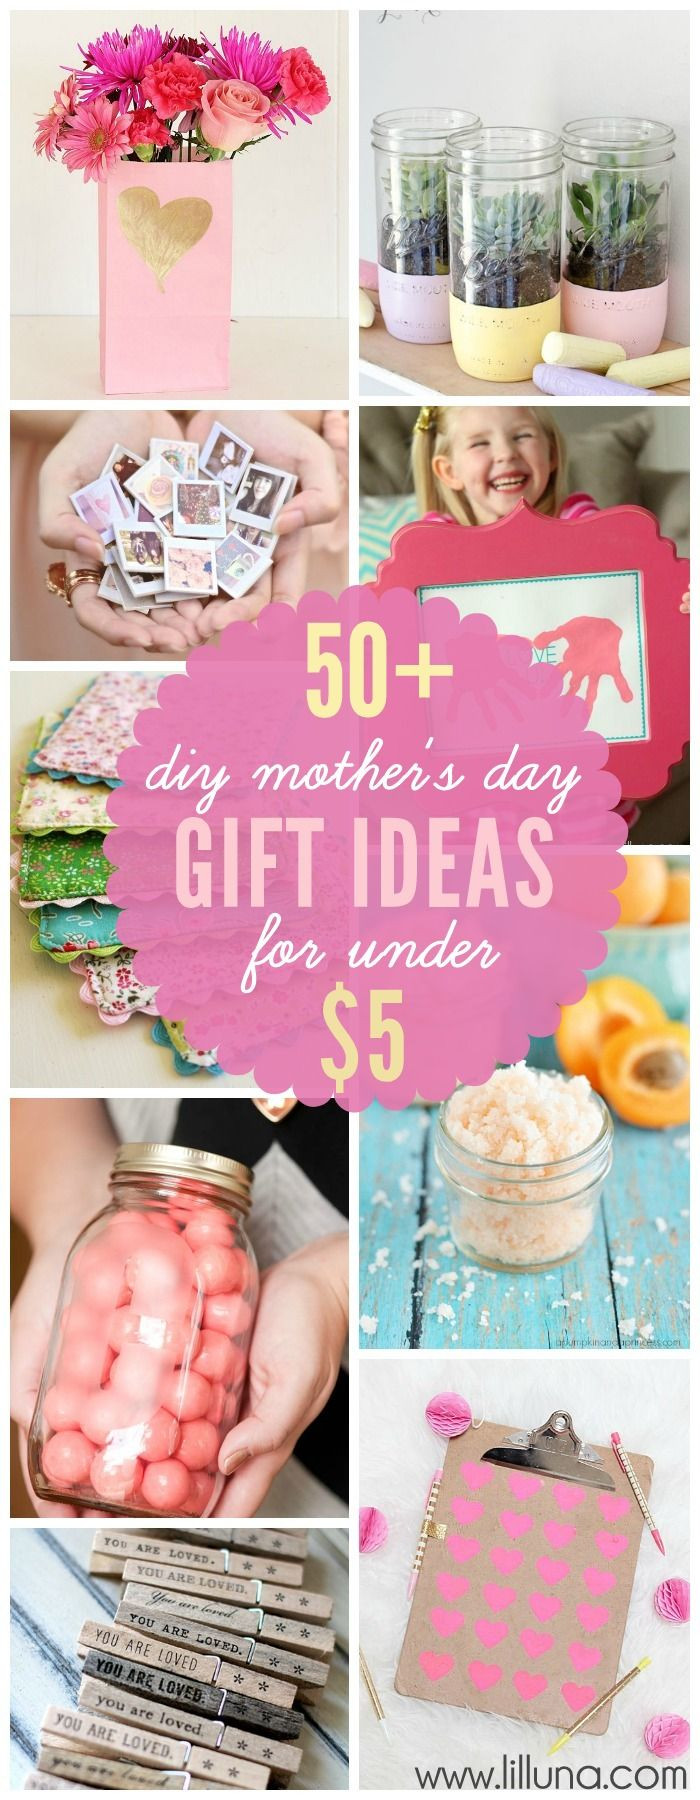 Mothers Day Cheap Gift Ideas
 BEST Homemade Mothers Day Gifts so many great ideas